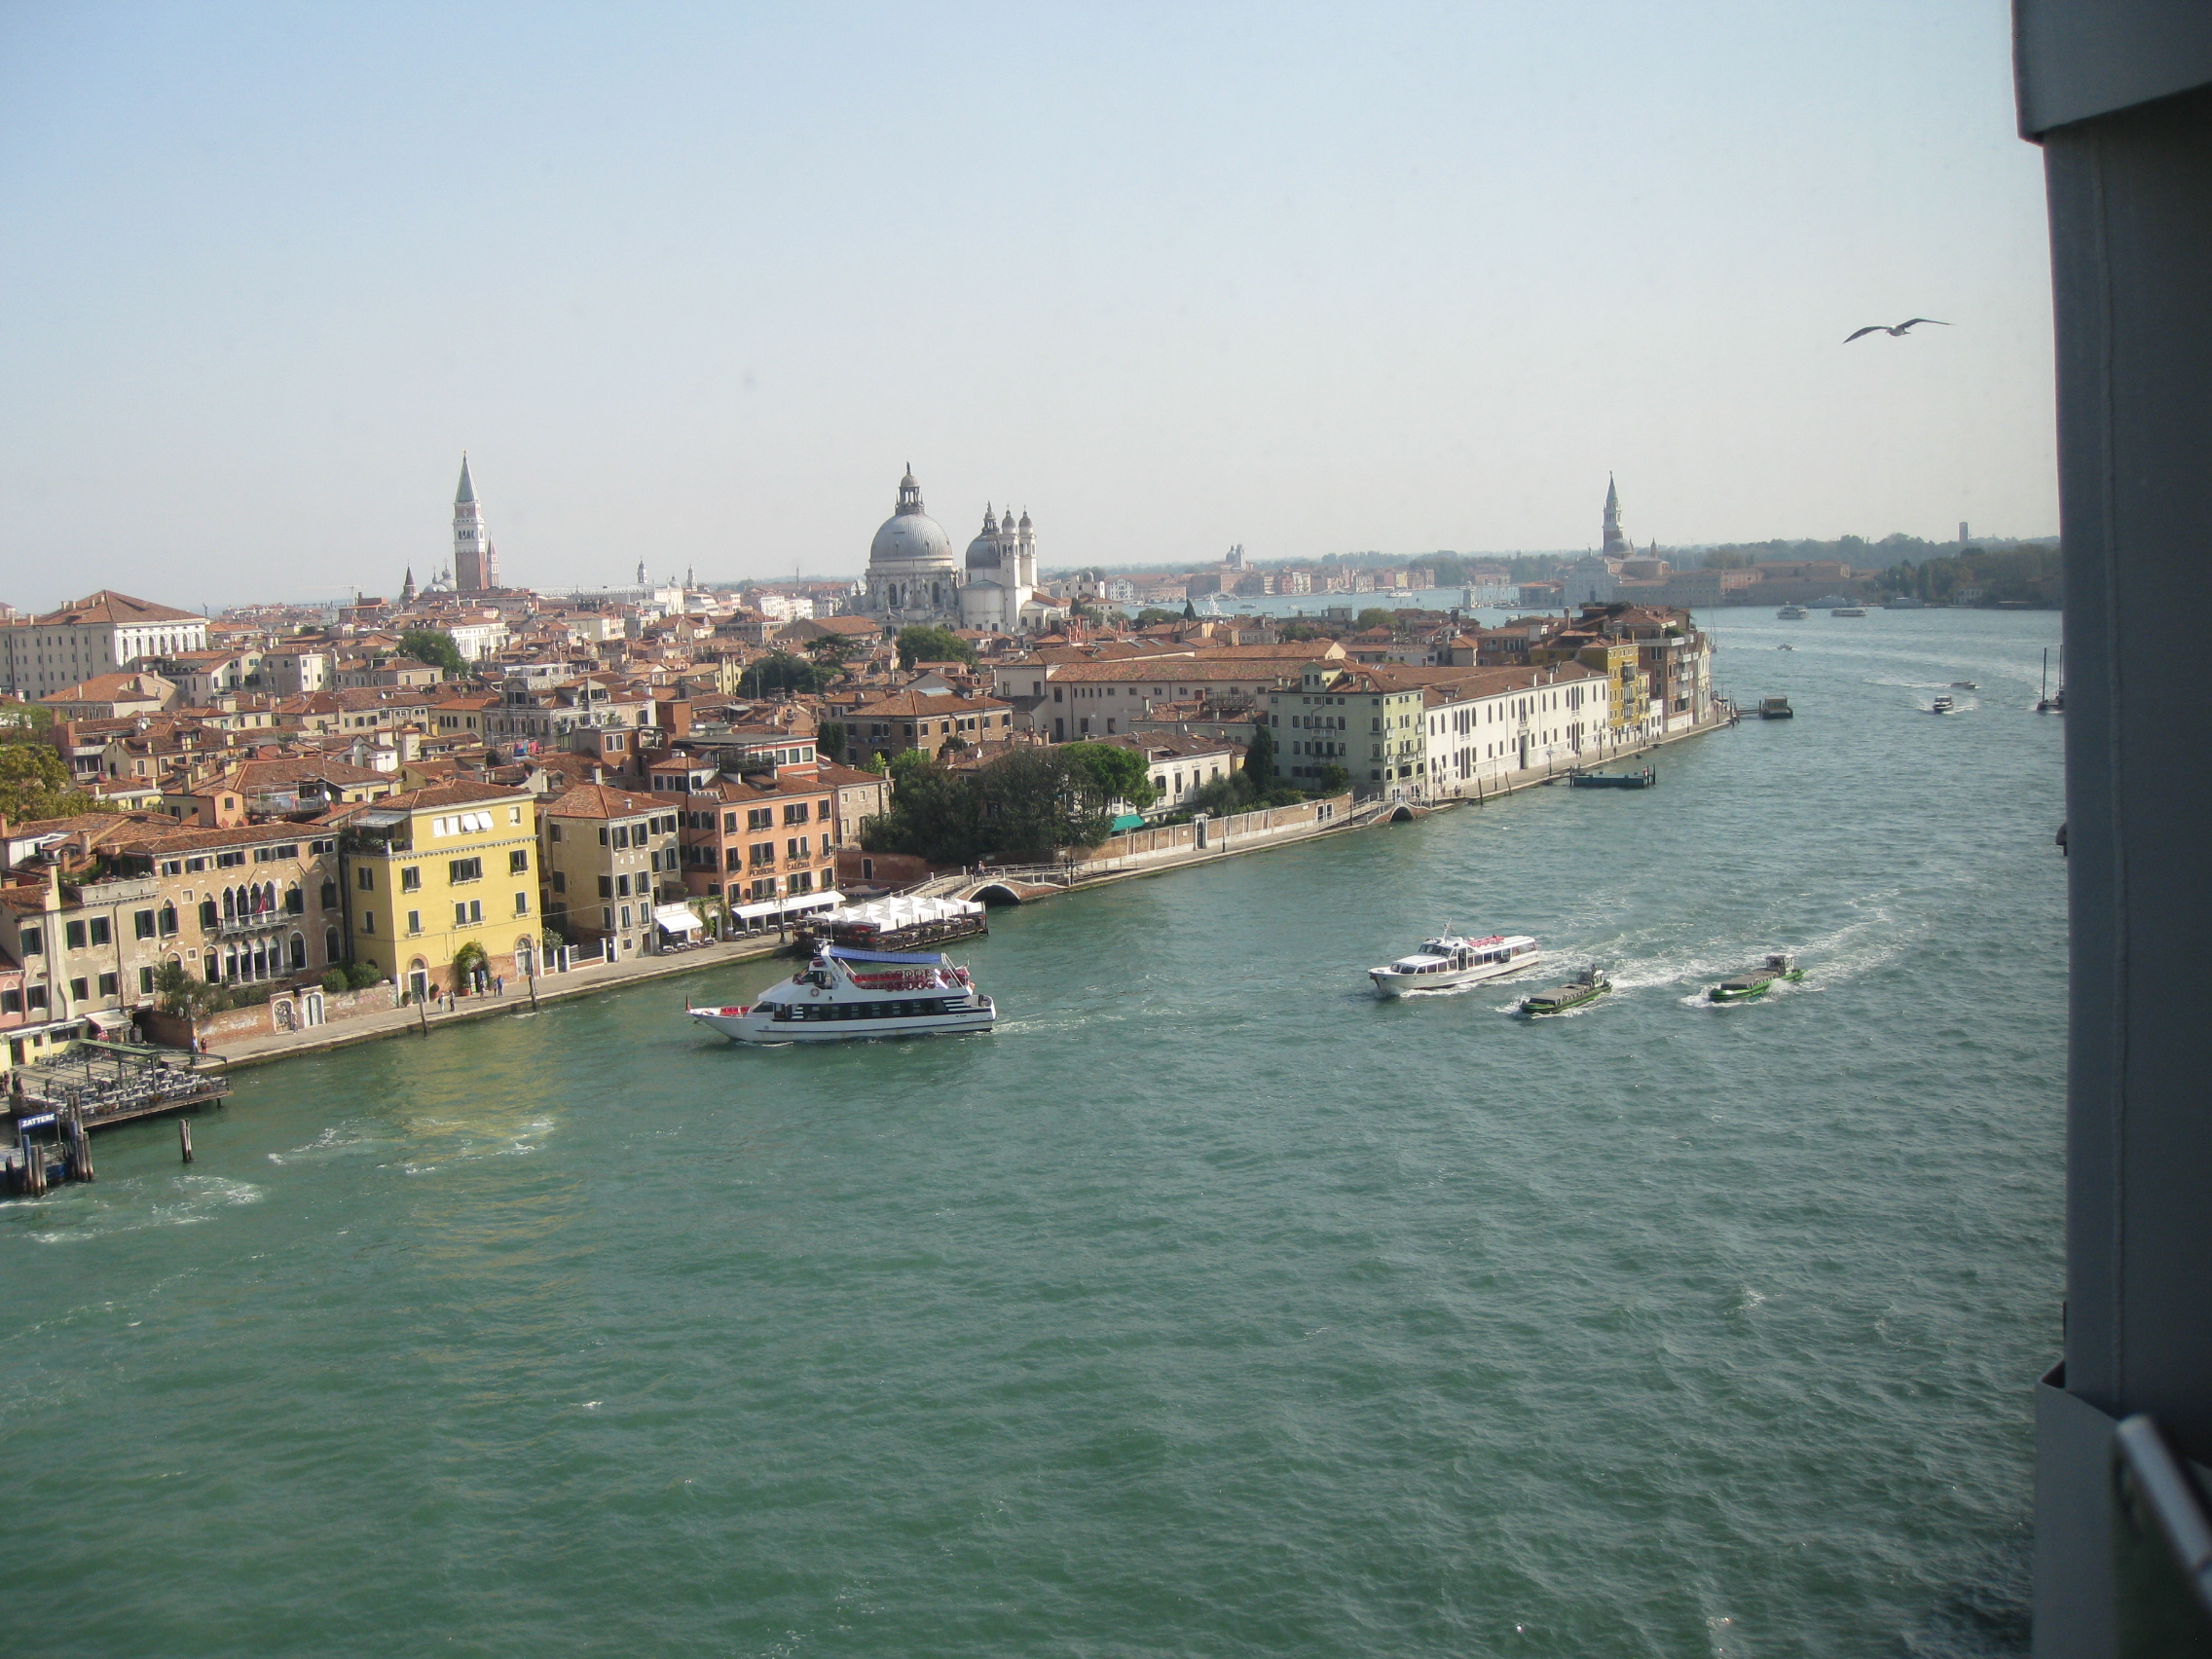 The view of Venice from our balconey.